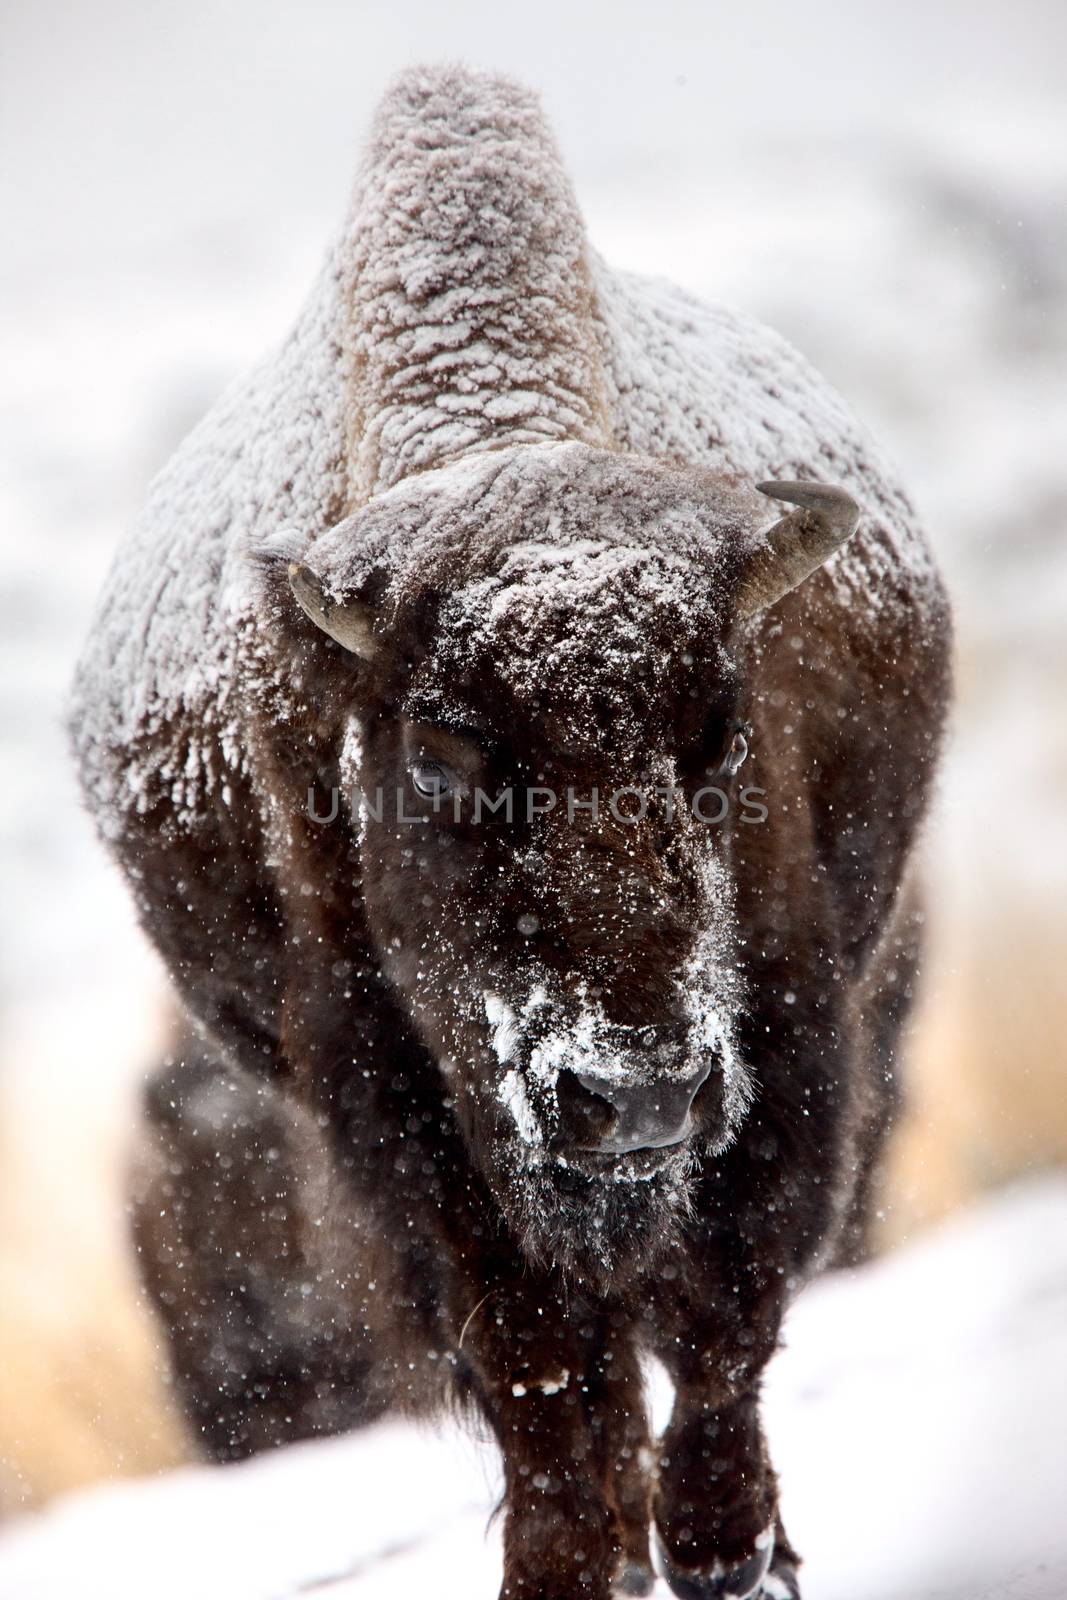 Bison Snow Storm by pictureguy